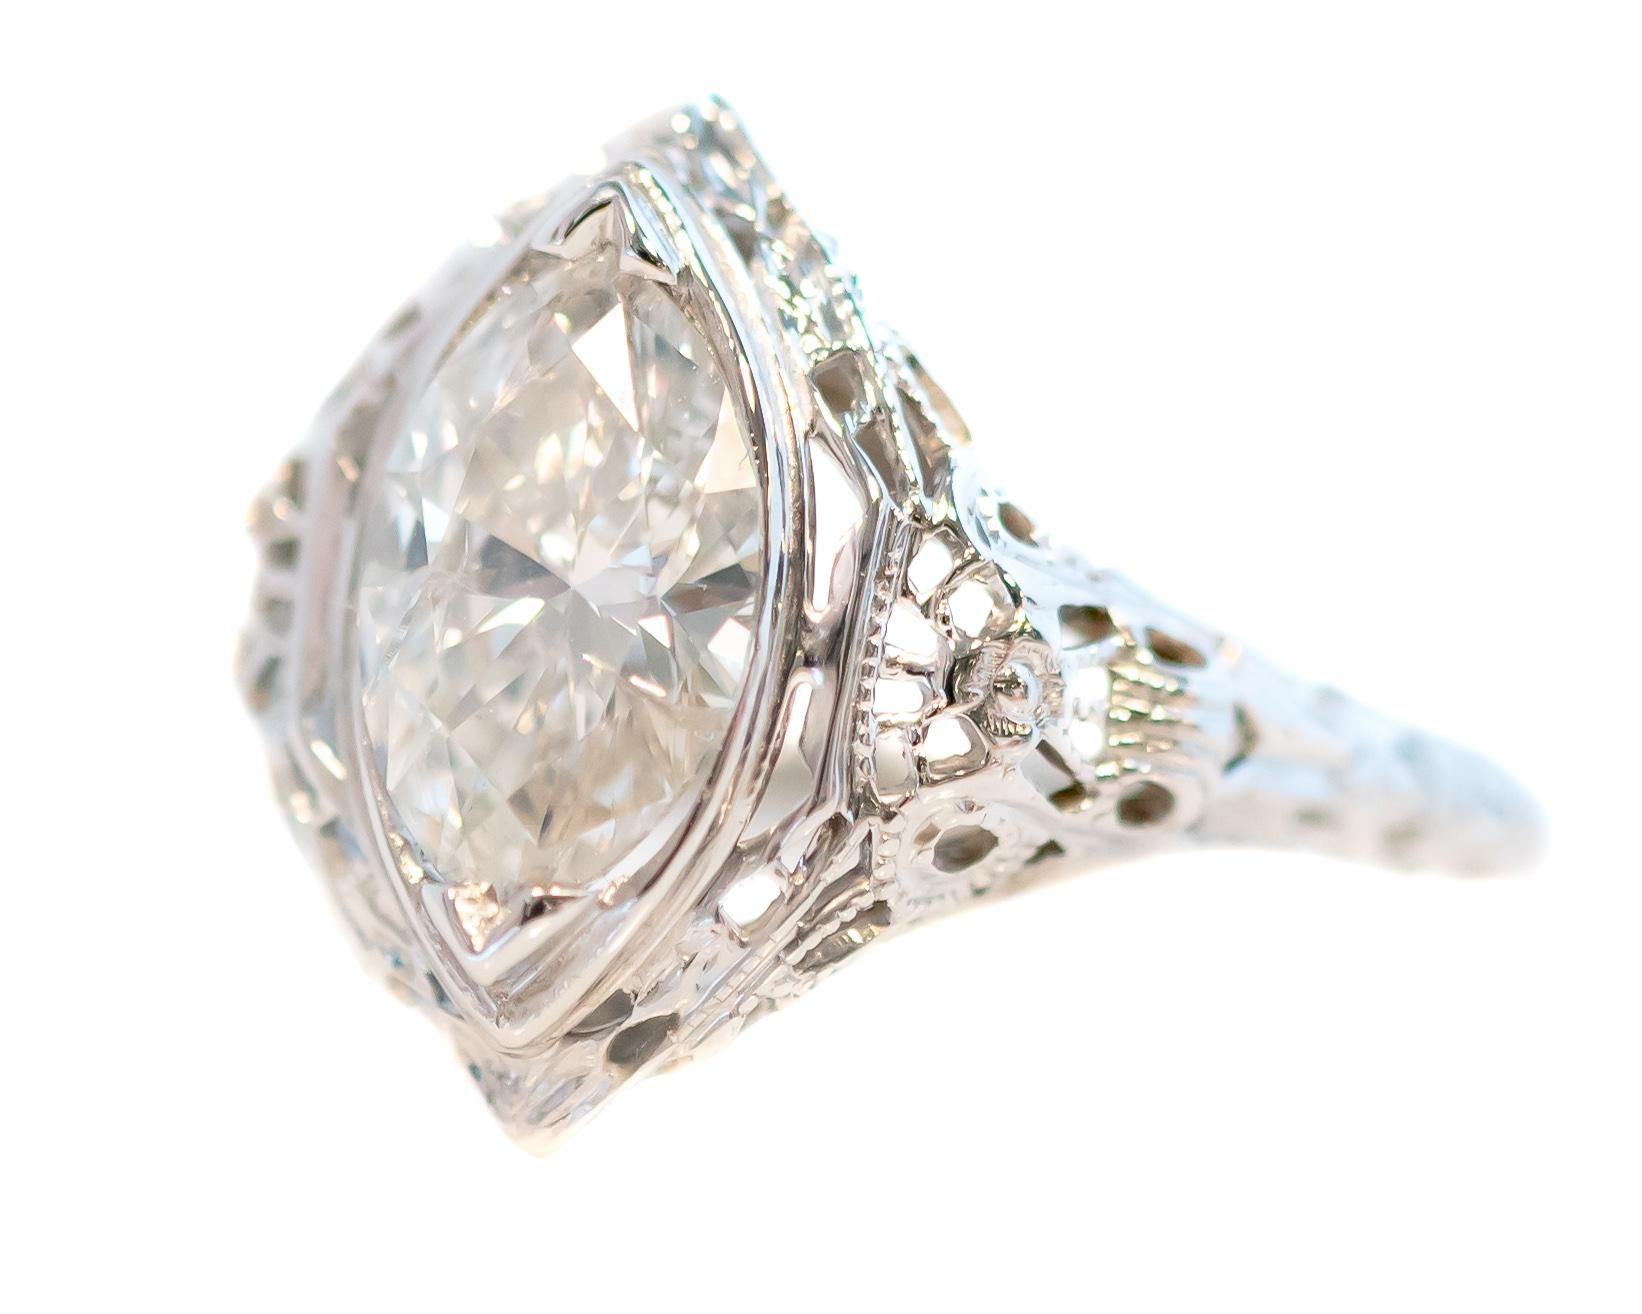 1940s Marquise Diamond Ring - 18 Karat White Gold, Diamond

Features:
1.0 carat Marquise cut Diamond
18 Karat White Gold Filigree setting
Marquise shape
Decorative embellishment throughout the setting and on the top, side and bottom of the